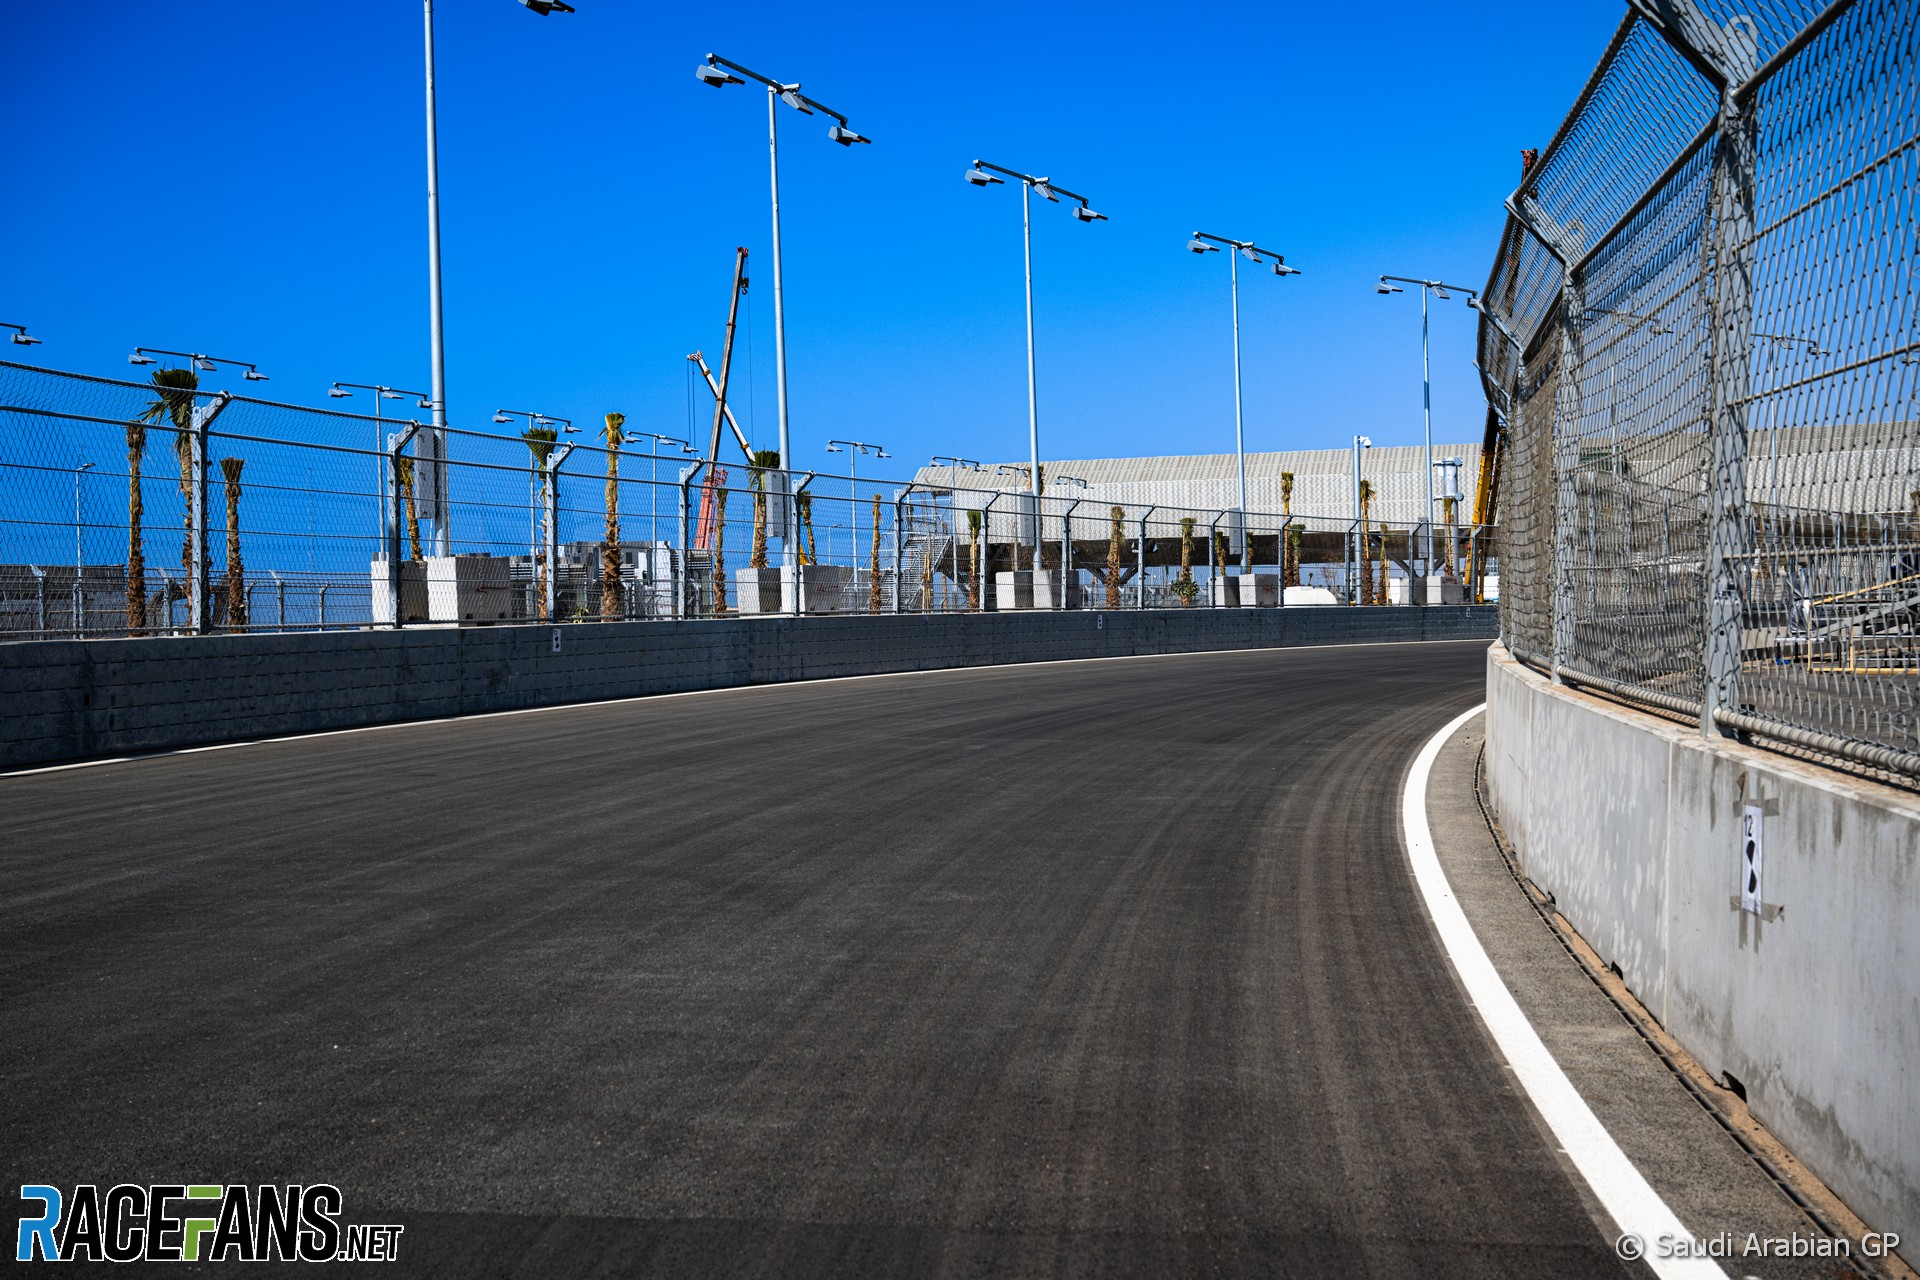 Jeddah's fresh track surface will make first event "very complicated" - Gasly · RaceFans